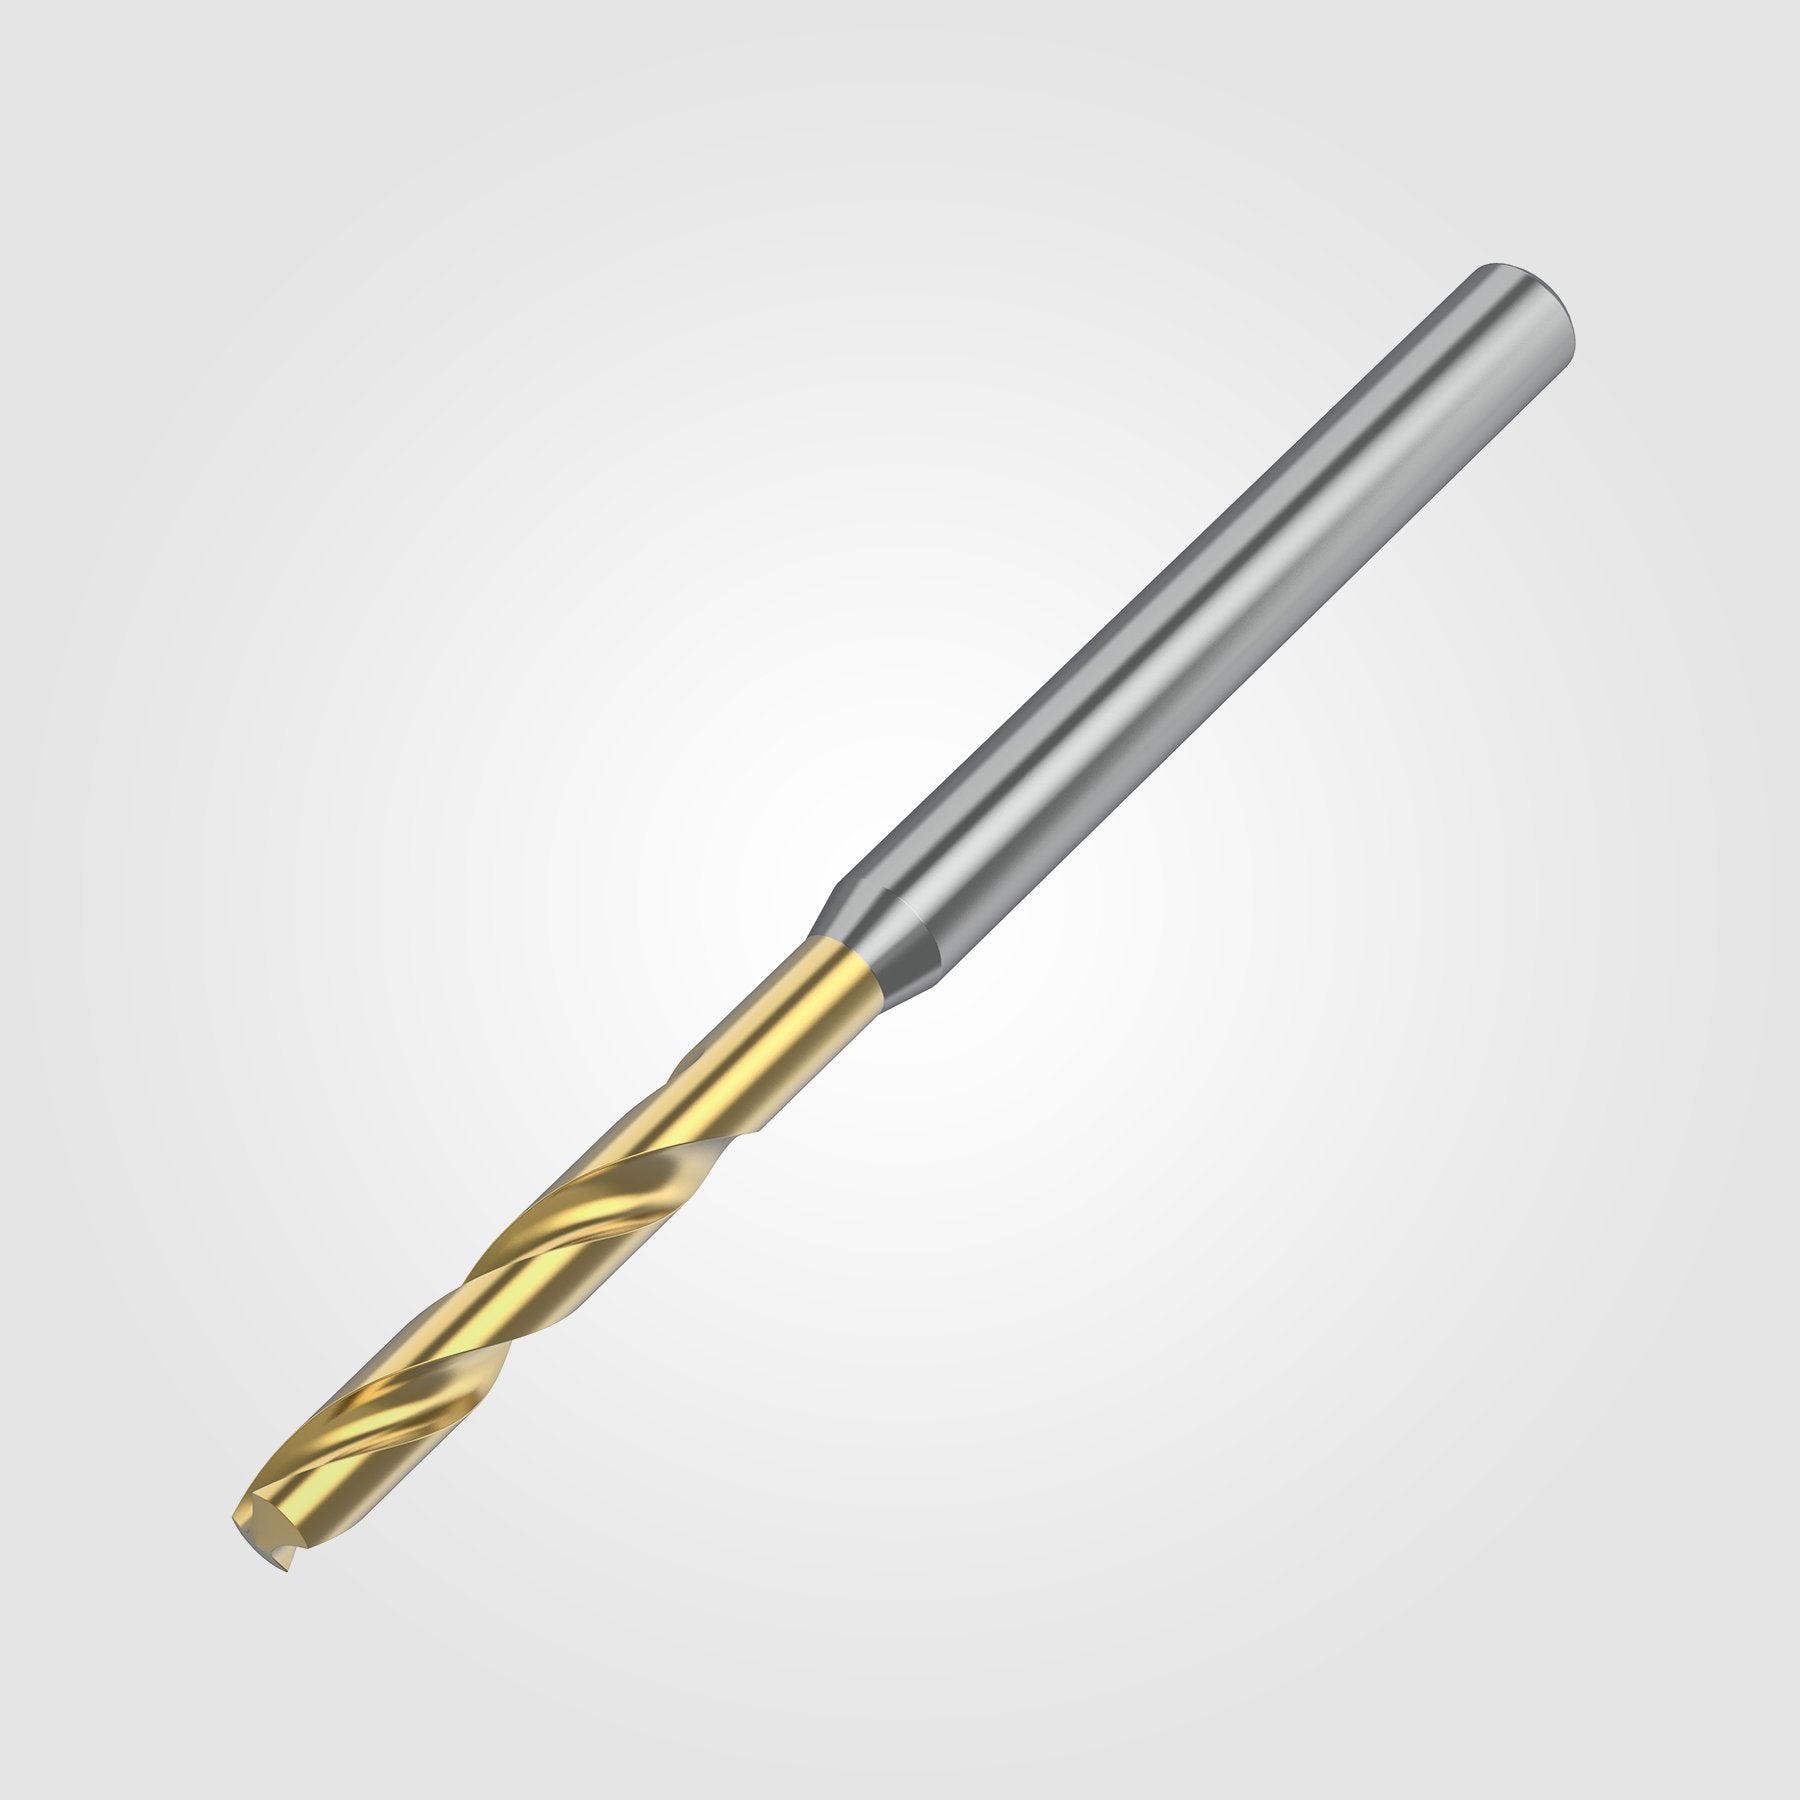 GOdrill (THROUGH COOLANT) | 17mm / .6693" / 5xD | SOLID CARBIDE DRILL | 4149375